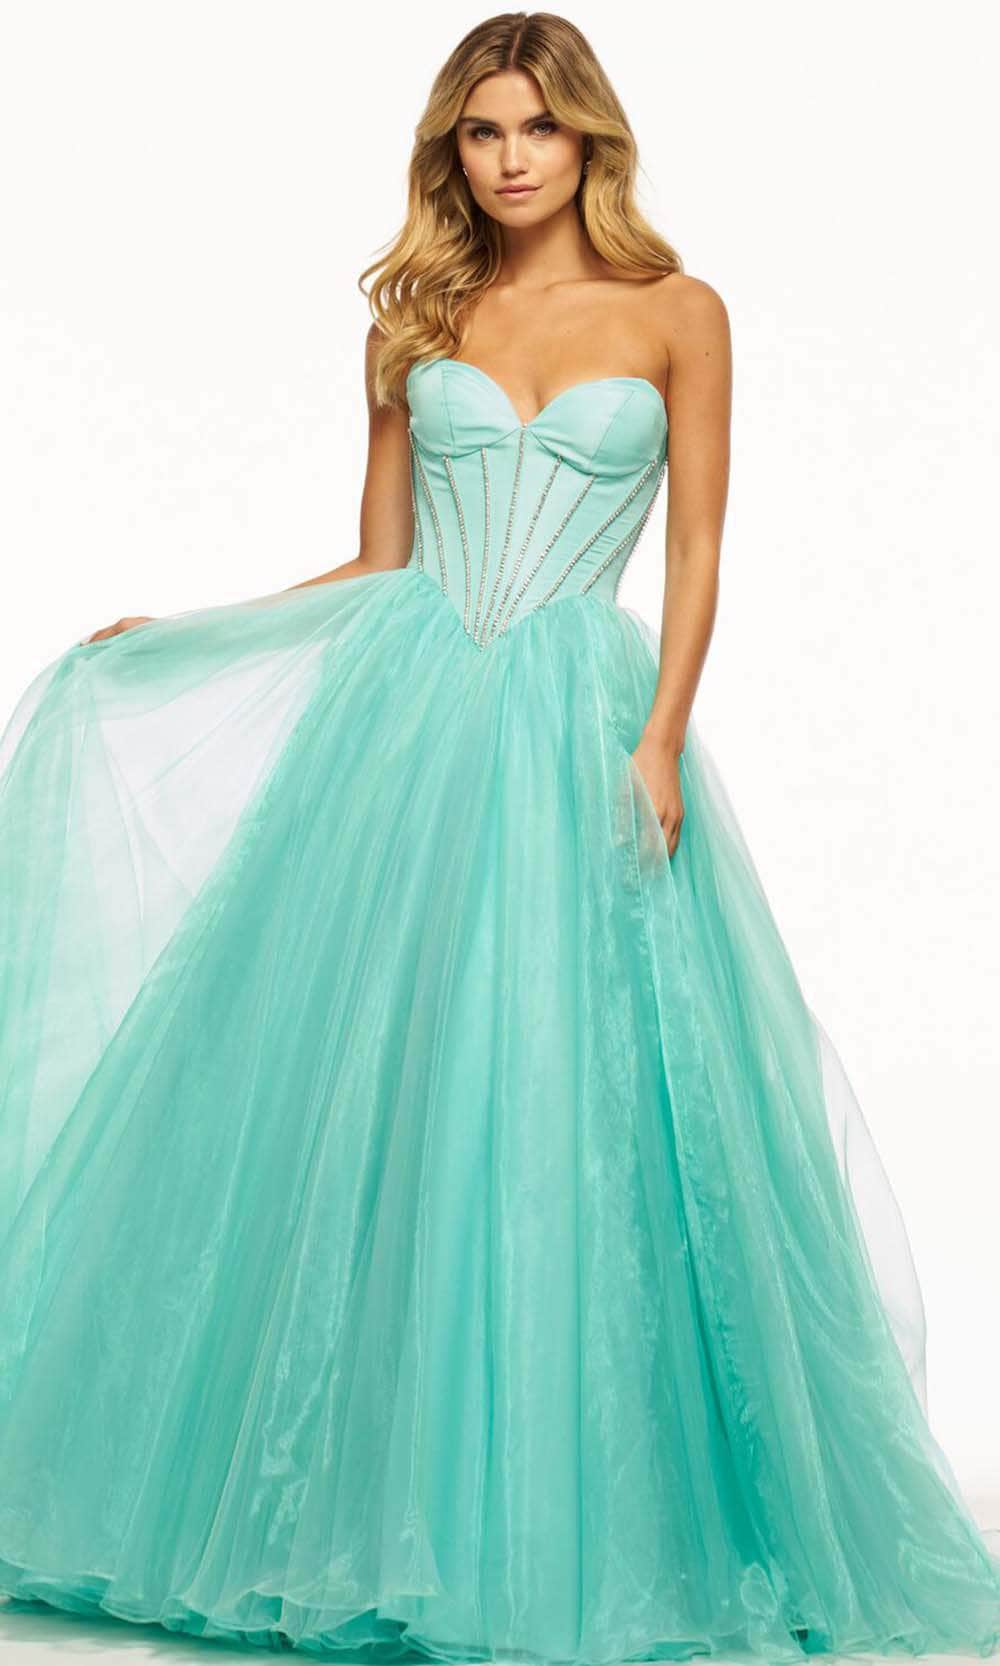 Image of Sherri Hill 56028 - Sweetheart Basque Evening Gown